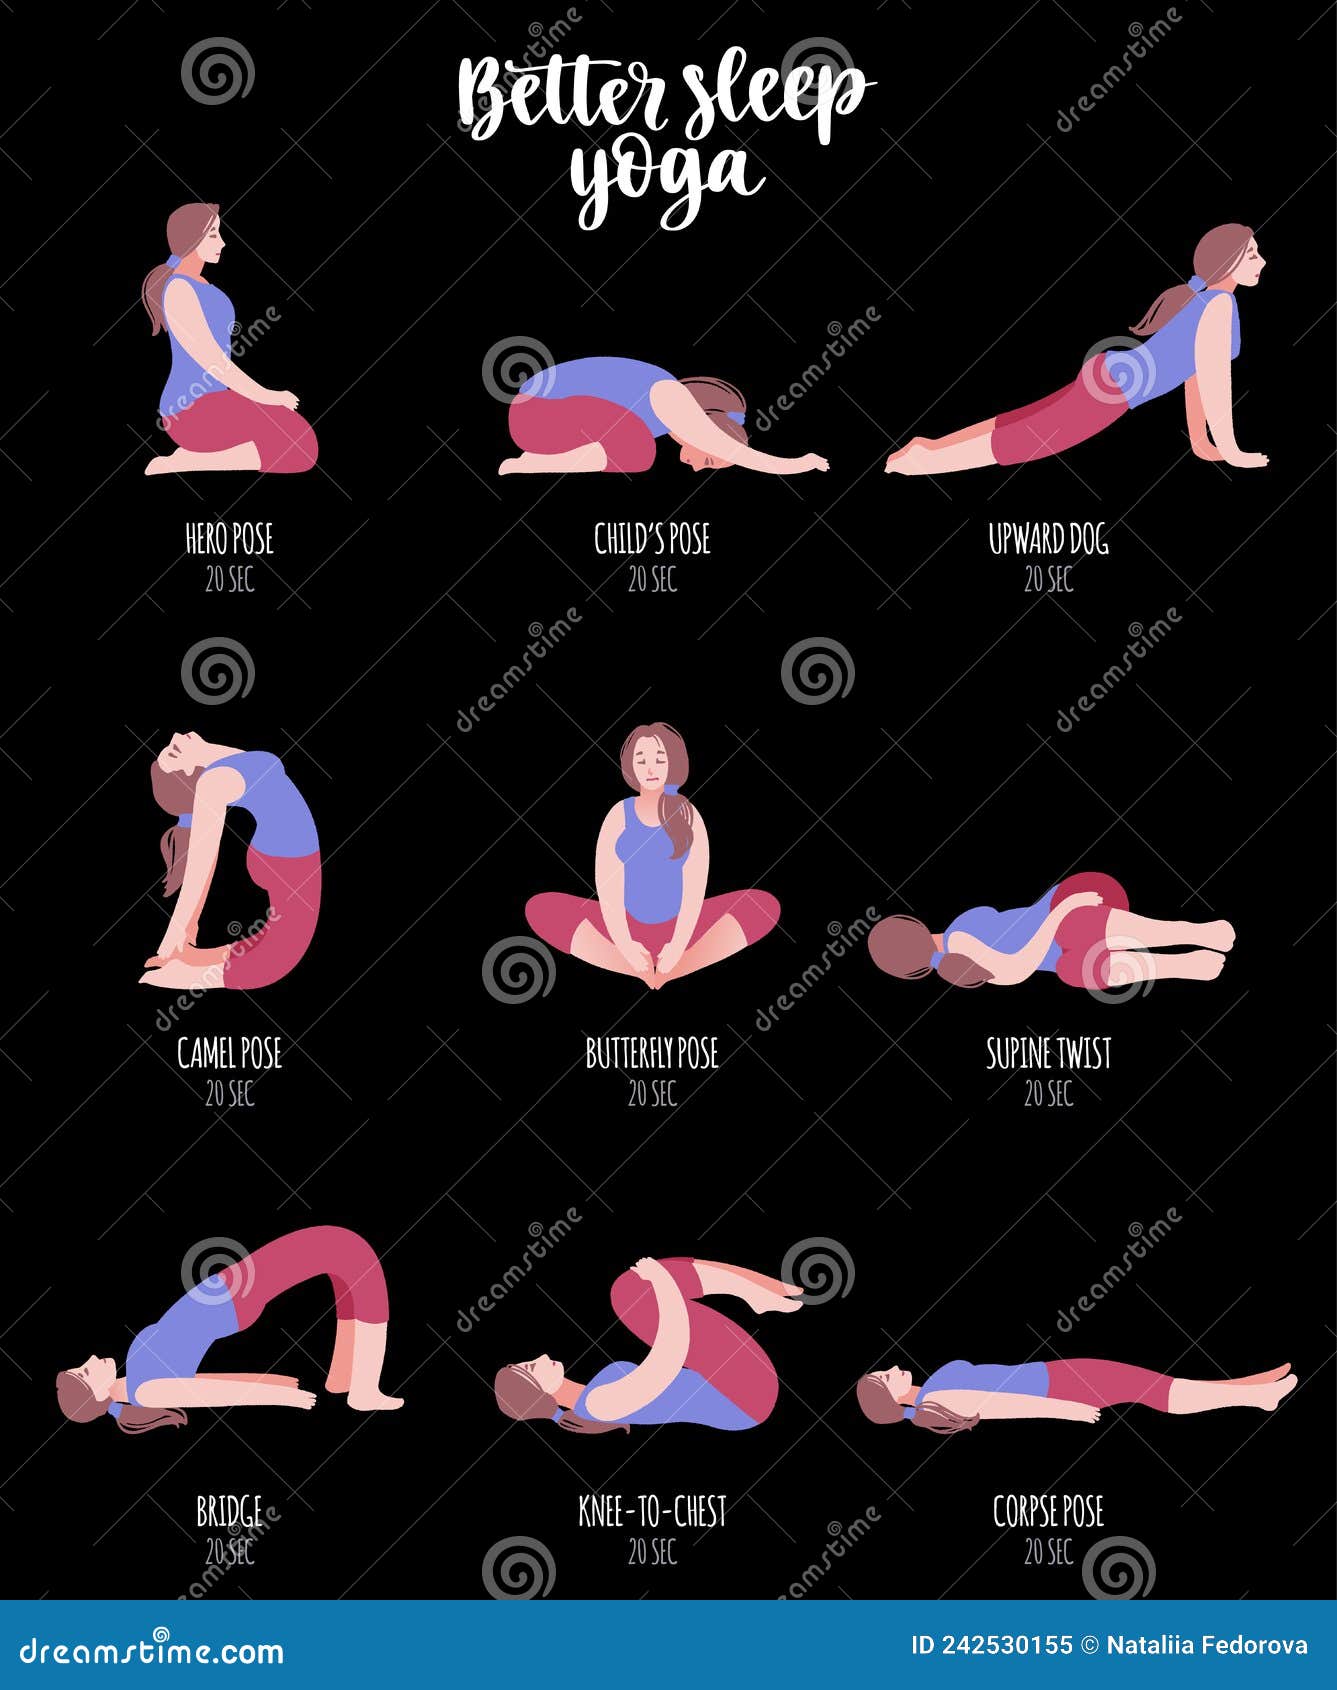 6 Poses to Warm Up Before a Workout - 20 min Yoga Sequence - Yoga with  Kassandra Blog